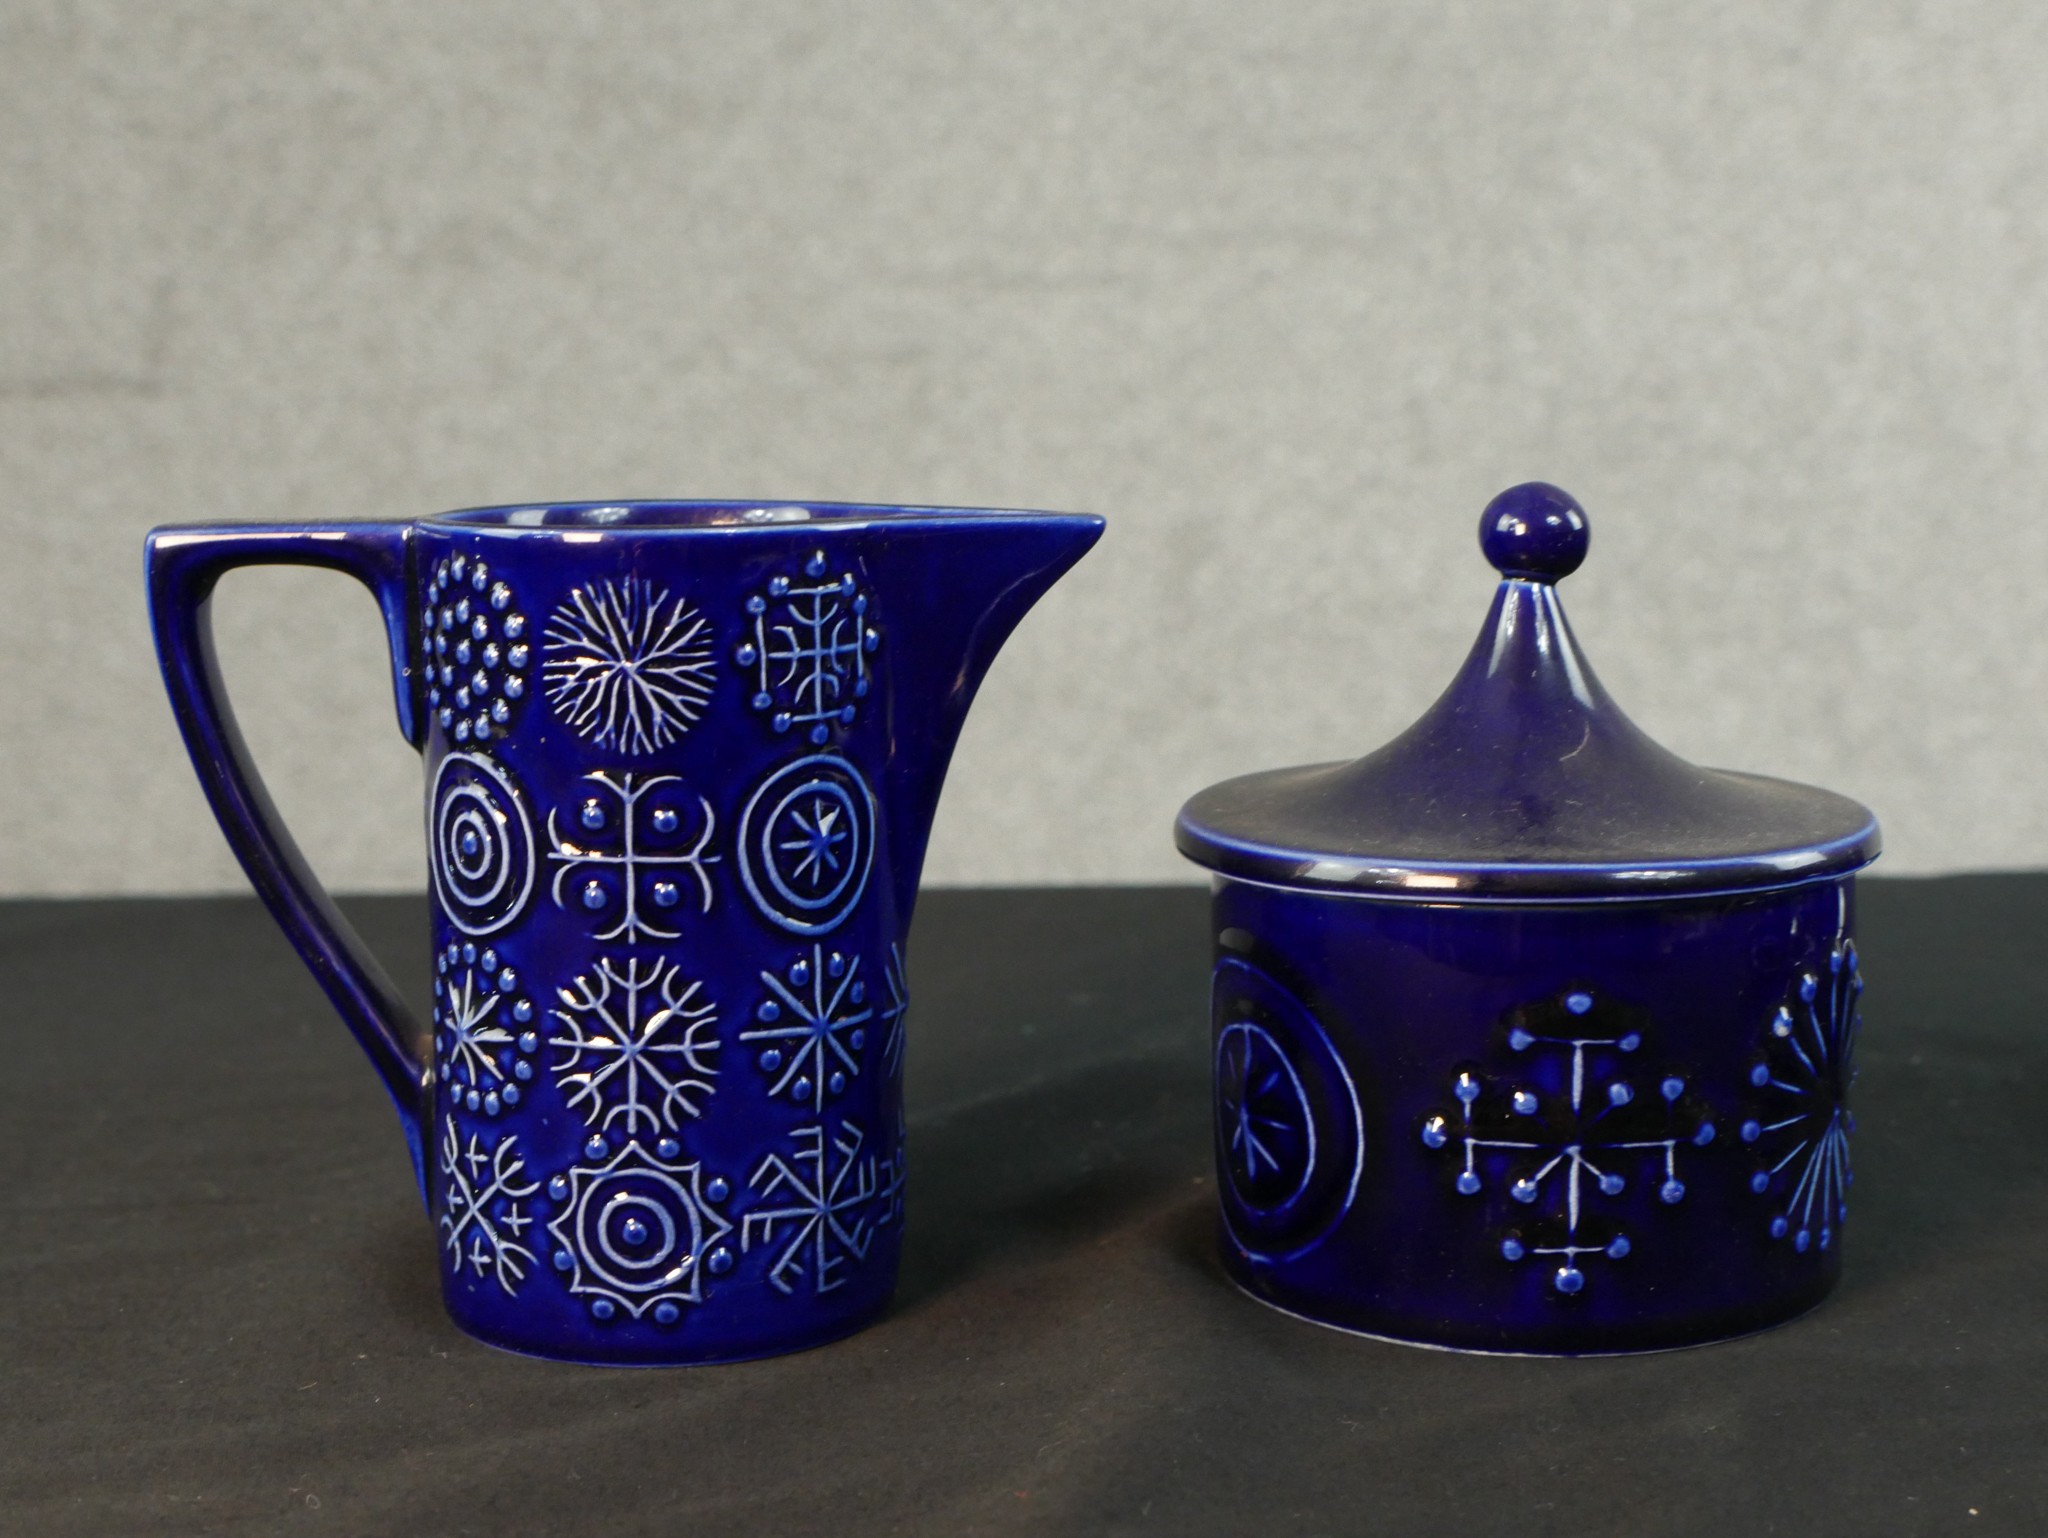 Susan Williams-Ellis for Portmeirion, a Totem pattern coffee set in a cobalt blue glaze, to seat - Image 3 of 6